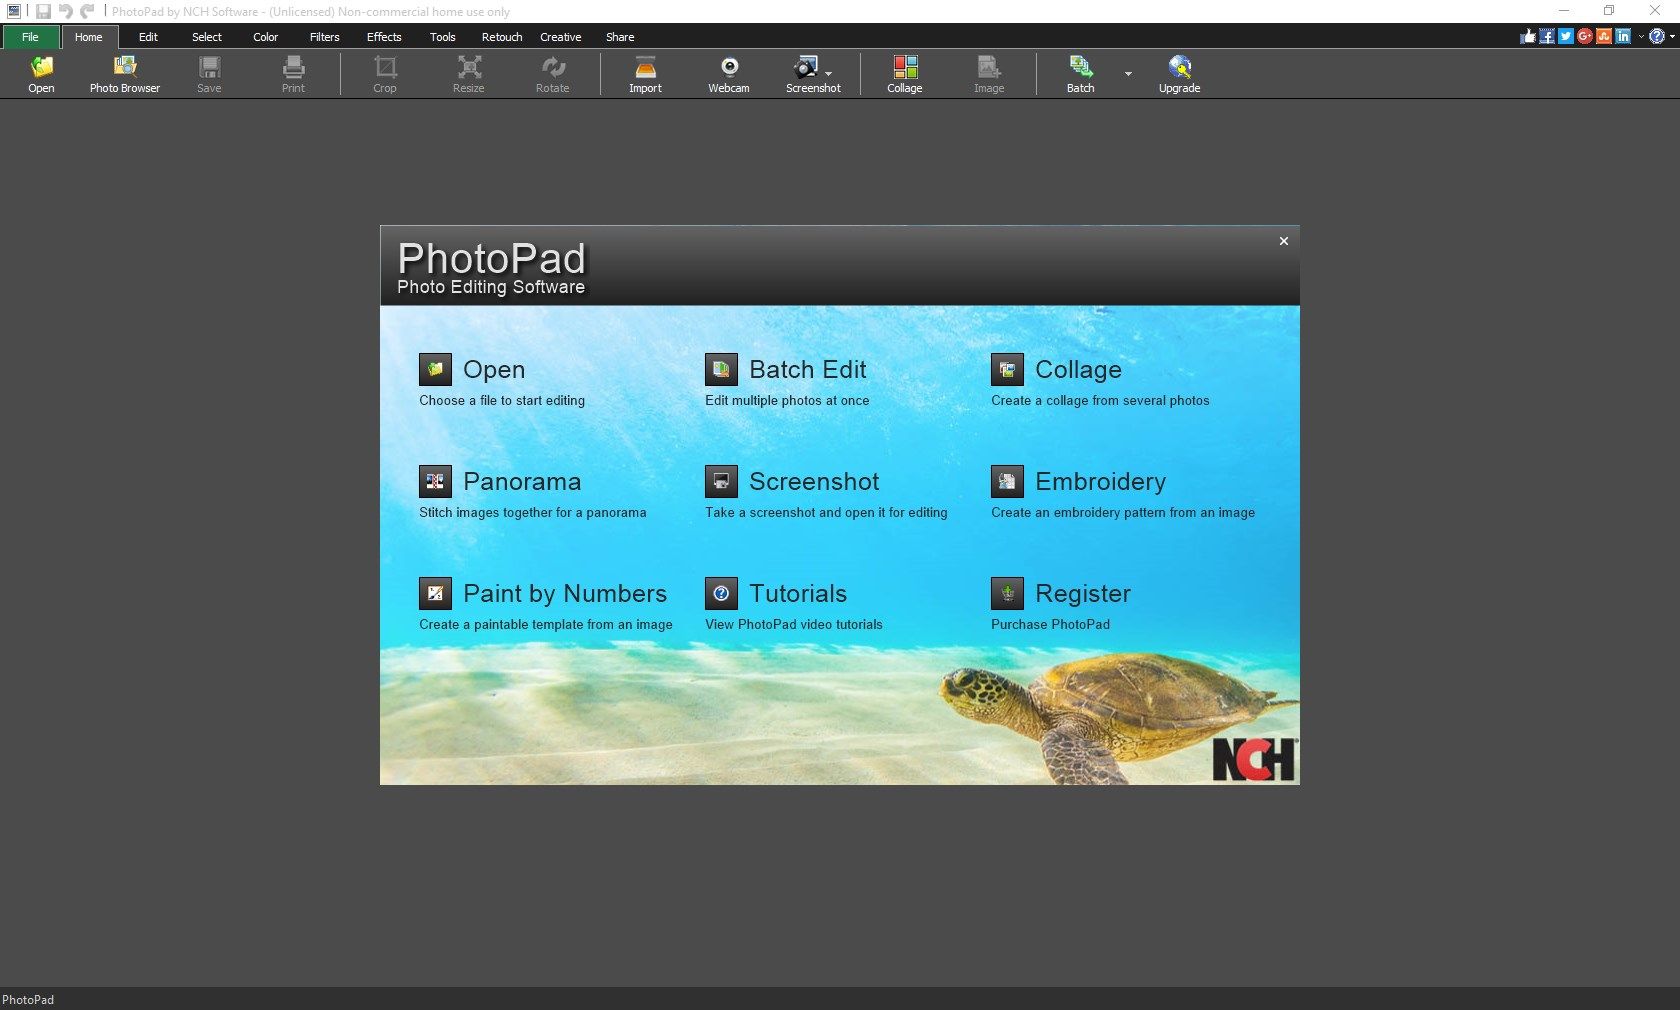 Easy access to all the information you need to start editing photos